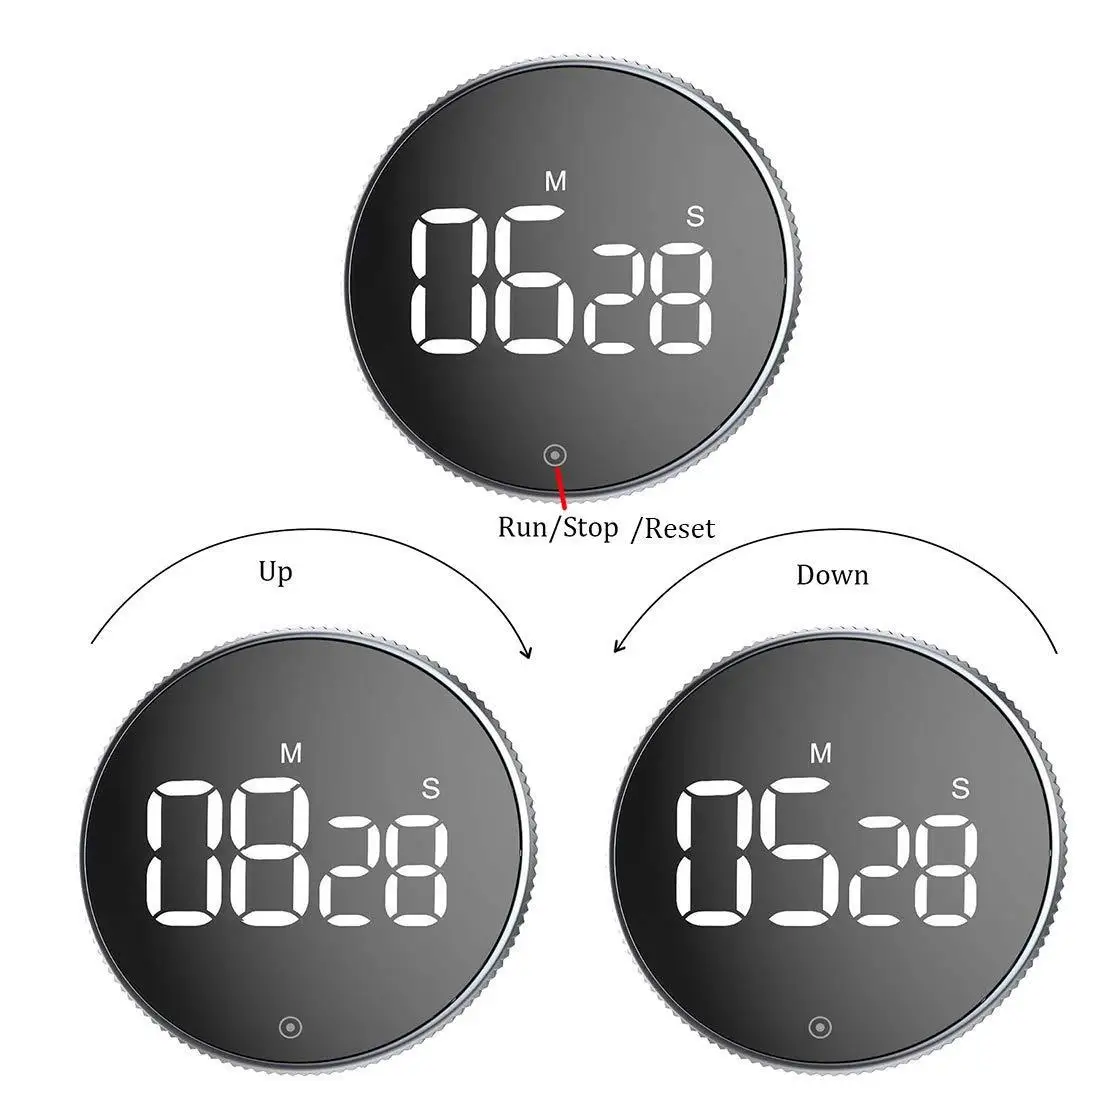 

LED twist One Button Operation for Teacher kids and Elderly,for lab,Kitchen Timer, HAPTIME Magnetic Countdown Digital Timer, Black (can oem)